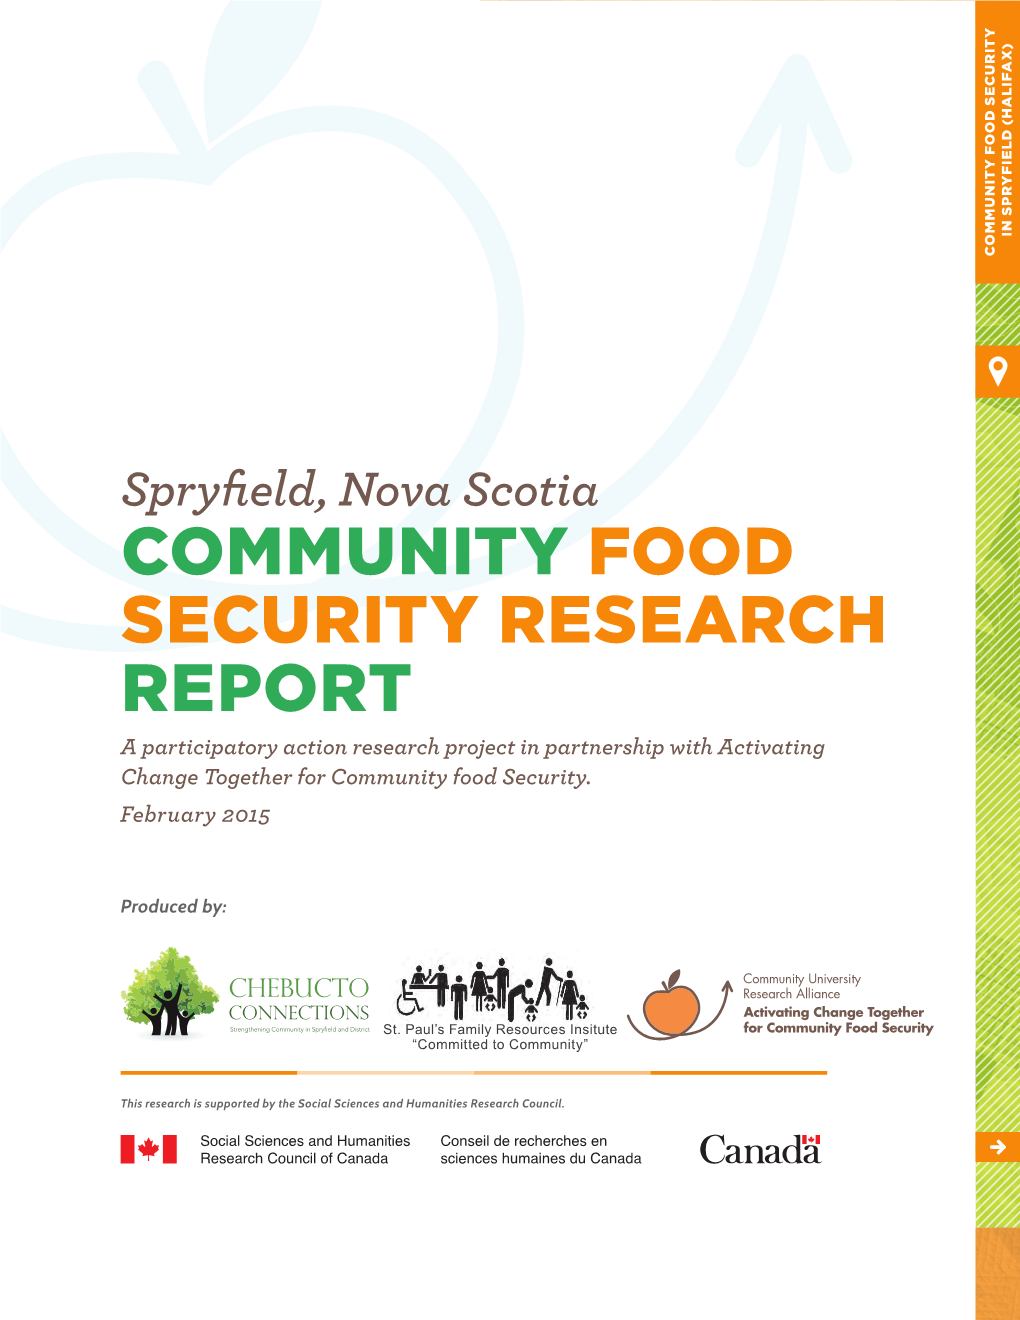 COMMUNITY FOOD SECURITY RESEARCH REPORT a Participatory Action Research Project in Partnership with Activating Change Together for Community Food Security